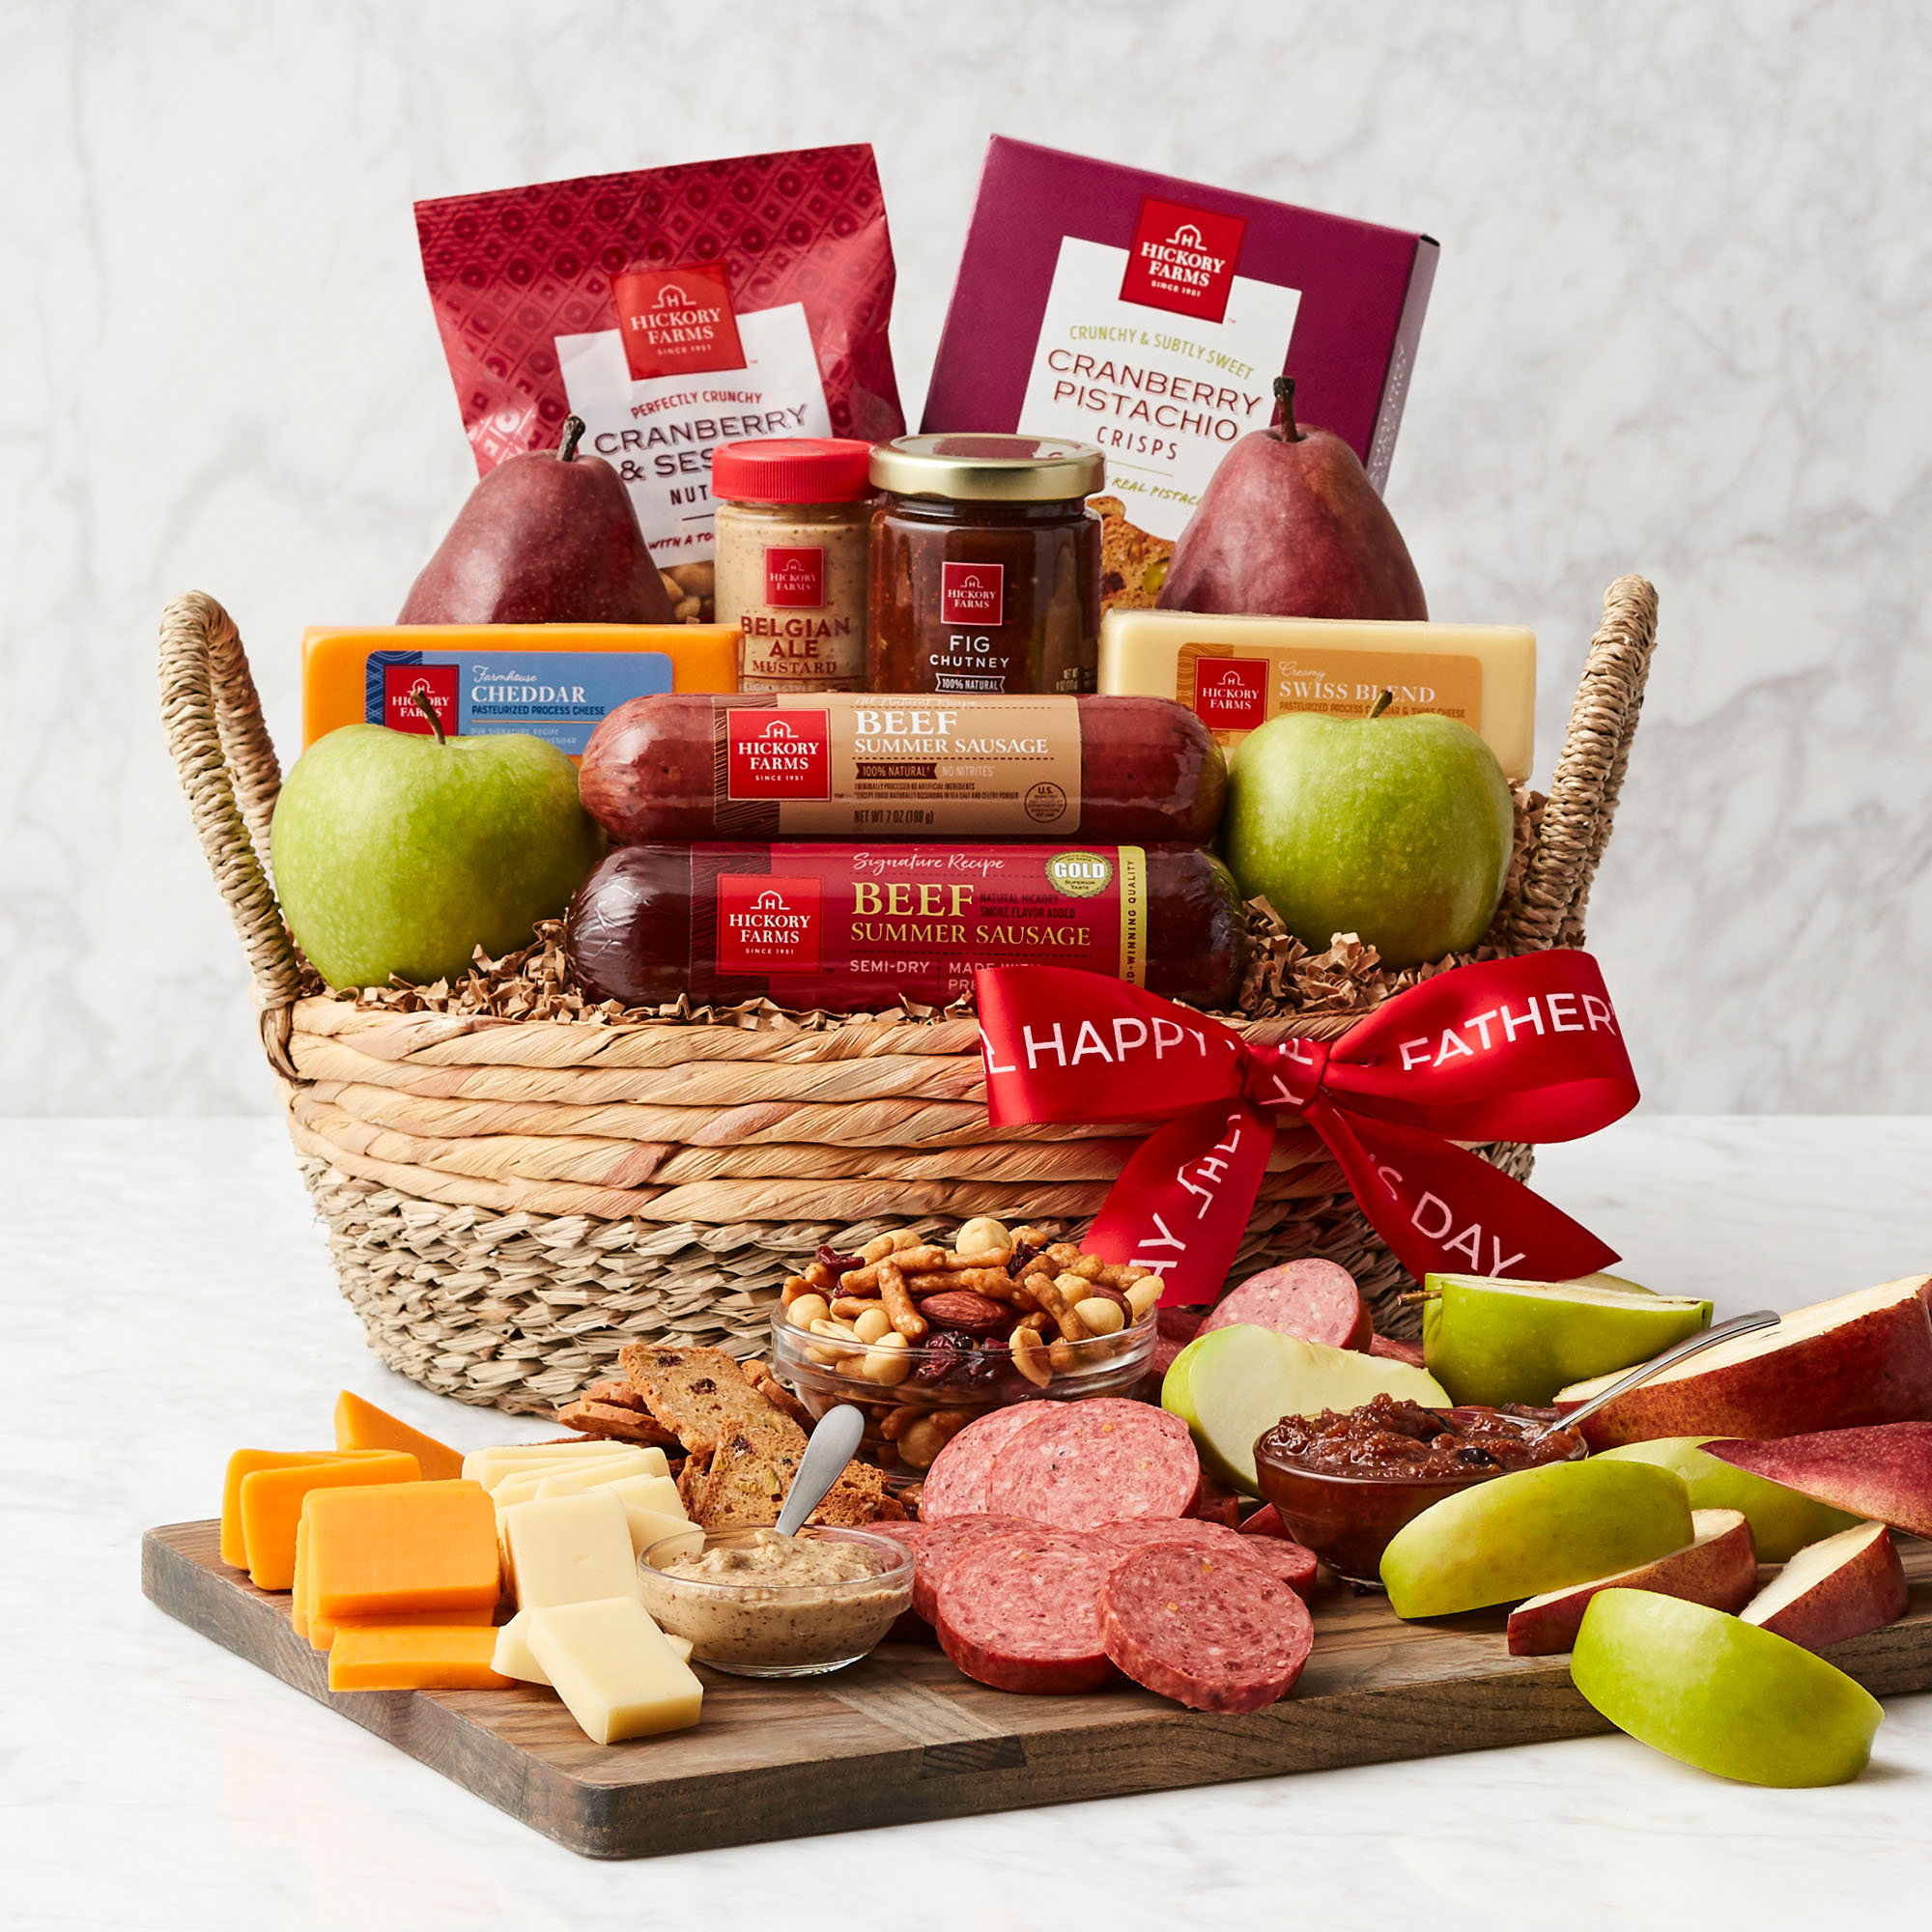 https://www.hickoryfarms.com/on/demandware.static/-/Sites-Web-Master-Catalog/default/dw345ae03c/images/products/fathers-day-fruit%20-and-snack-gift-basket-6975-1.jpg